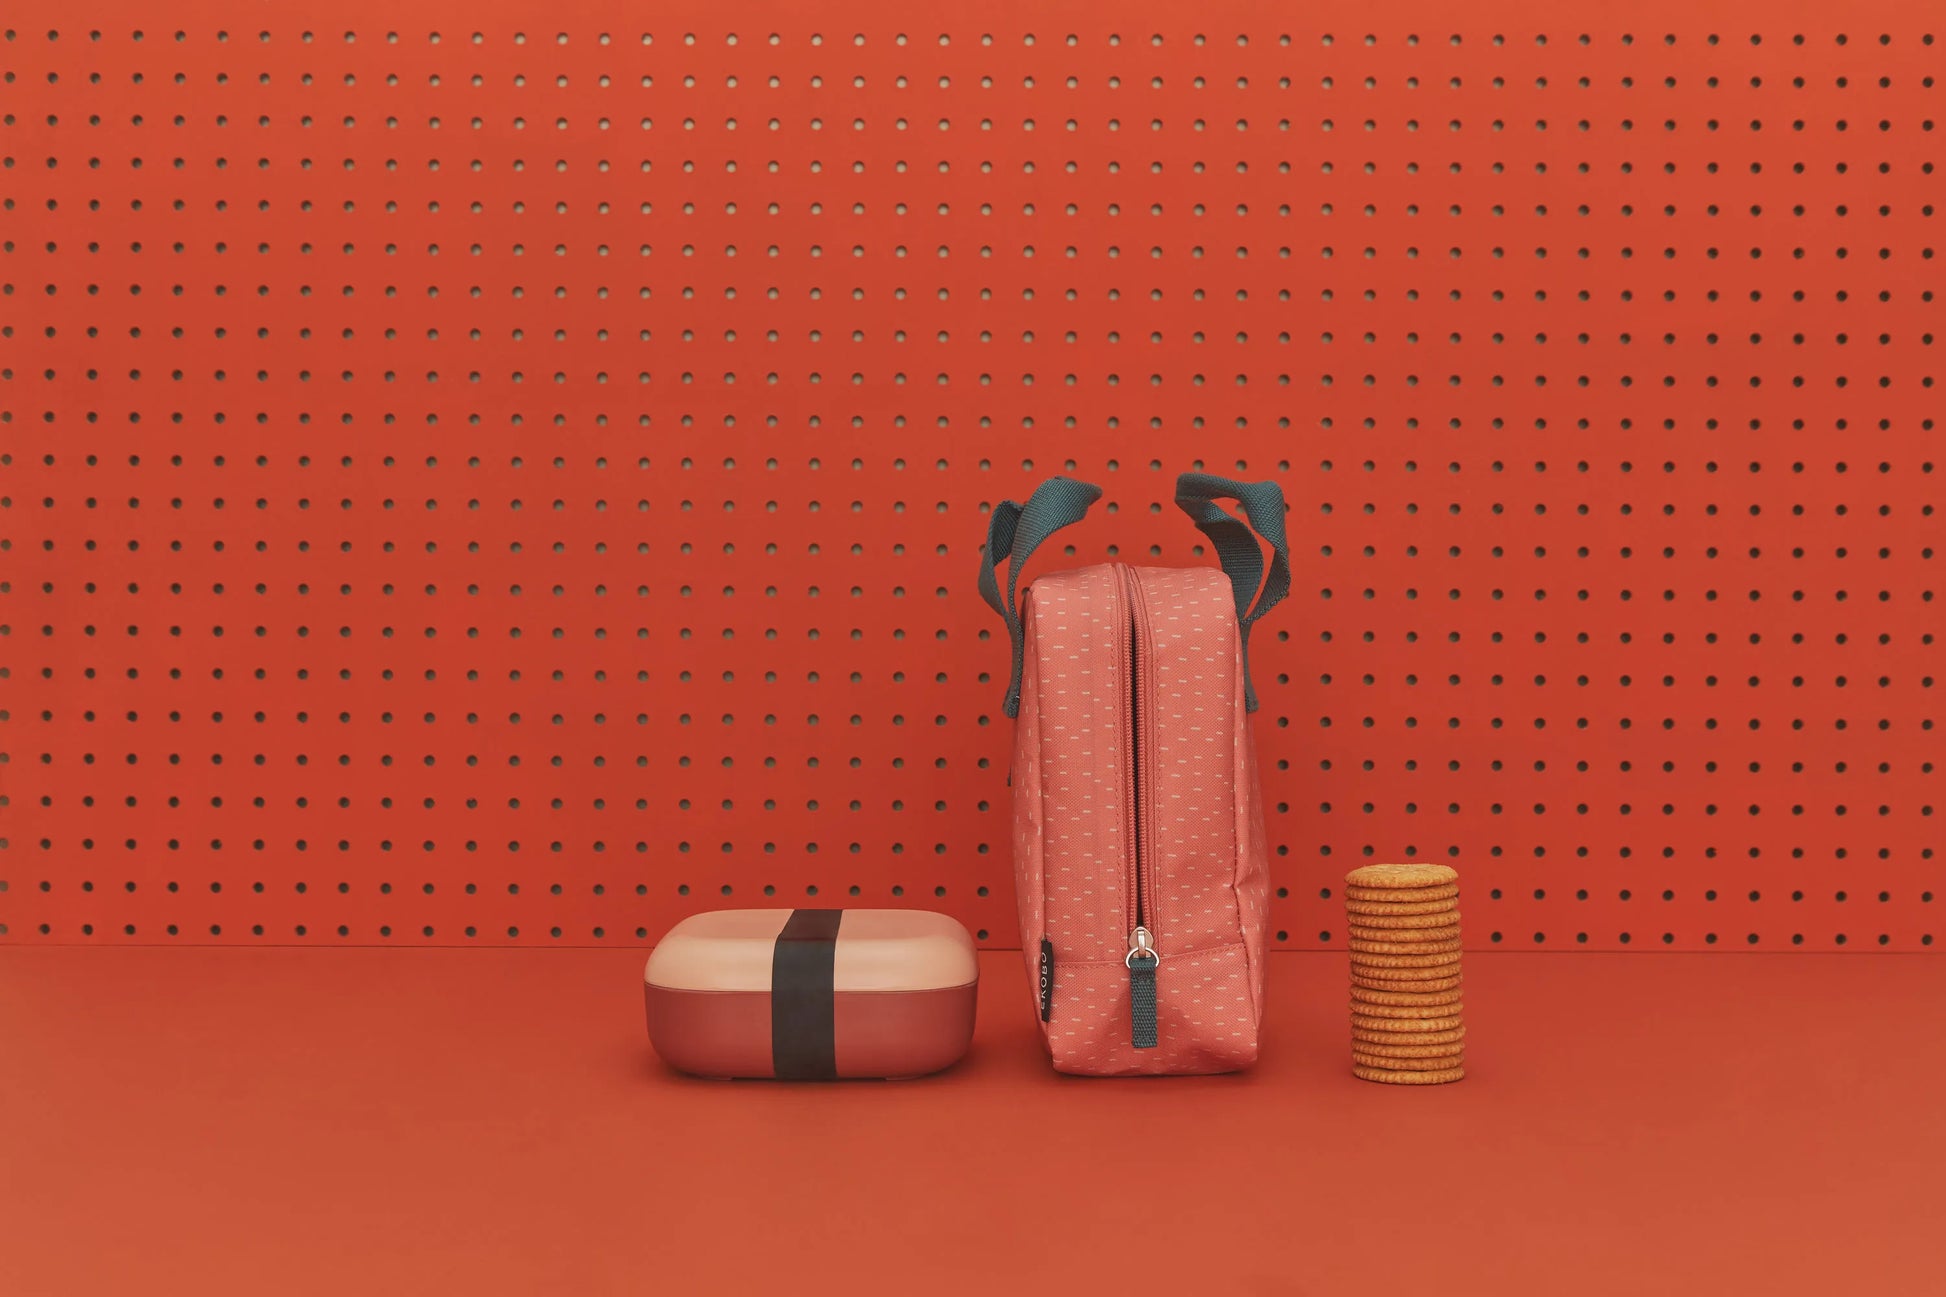 Blush and terracotta bento box next to bag and crackers.